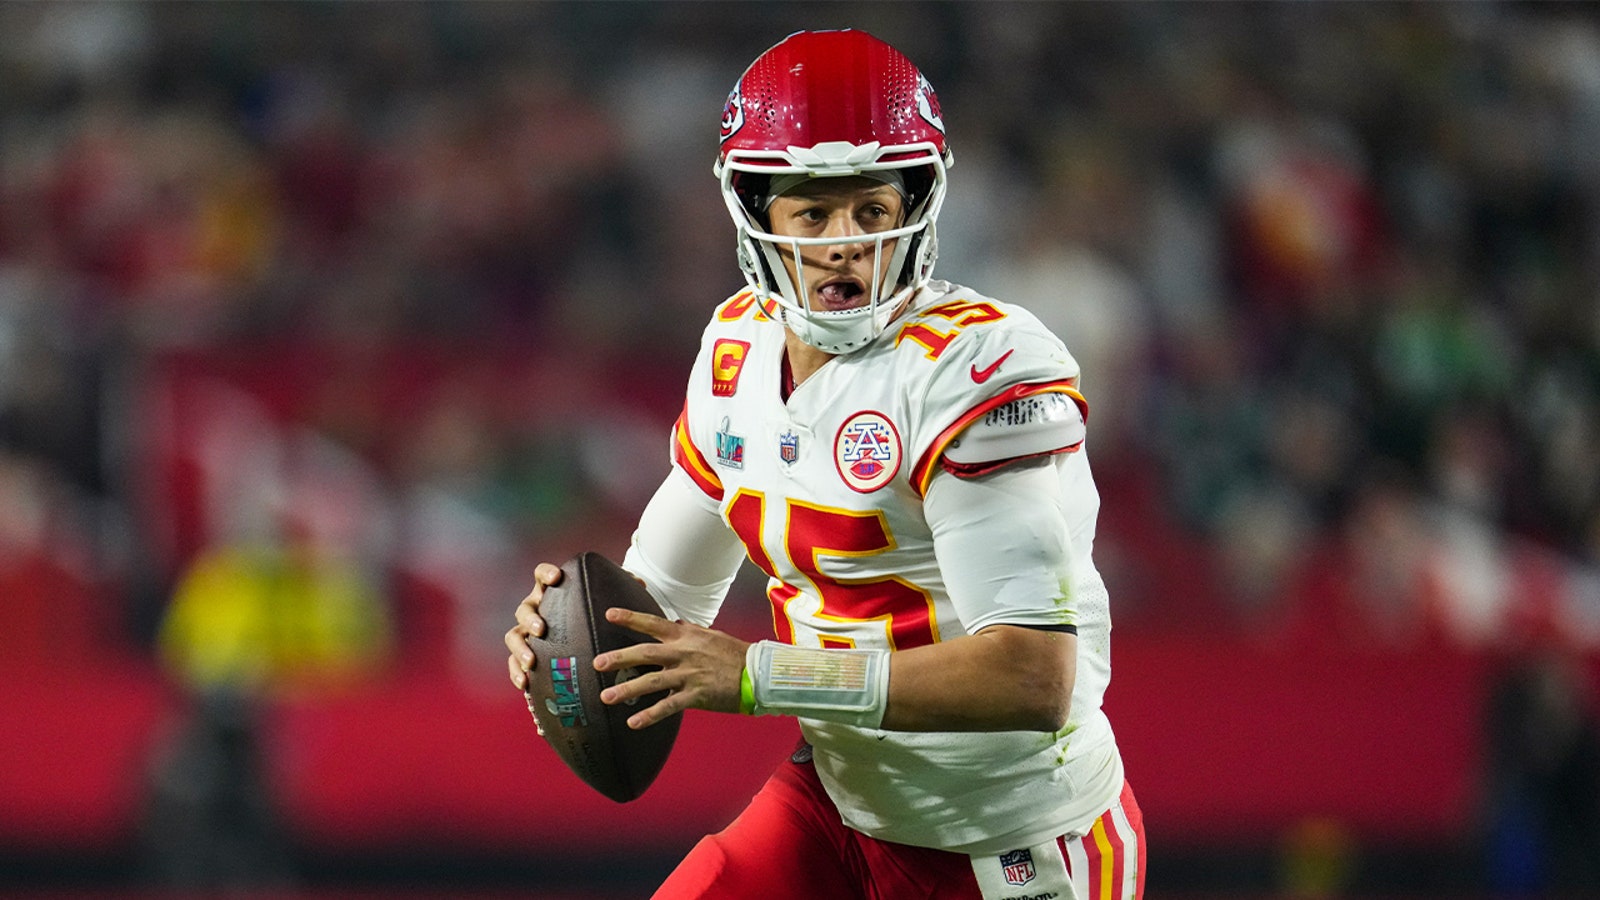 Beryl TV play-635d53dca000326--mahom_1676259487547 Patrick Mahomes adds to legacy with second Super Bowl title Sports 